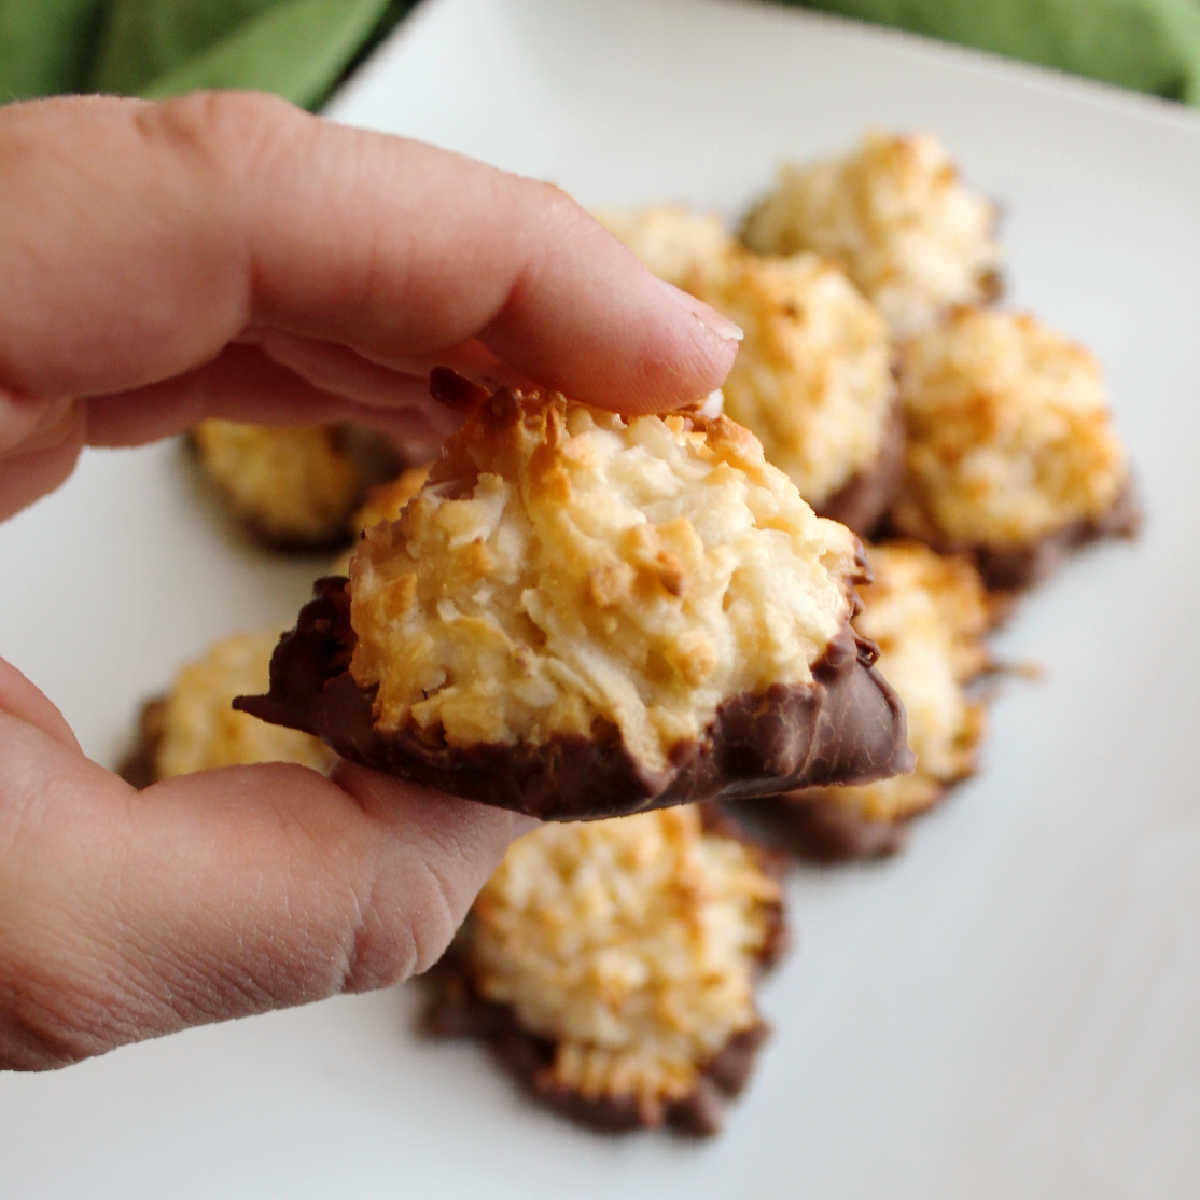 hand holding chocolate dipped coconut macaroon.